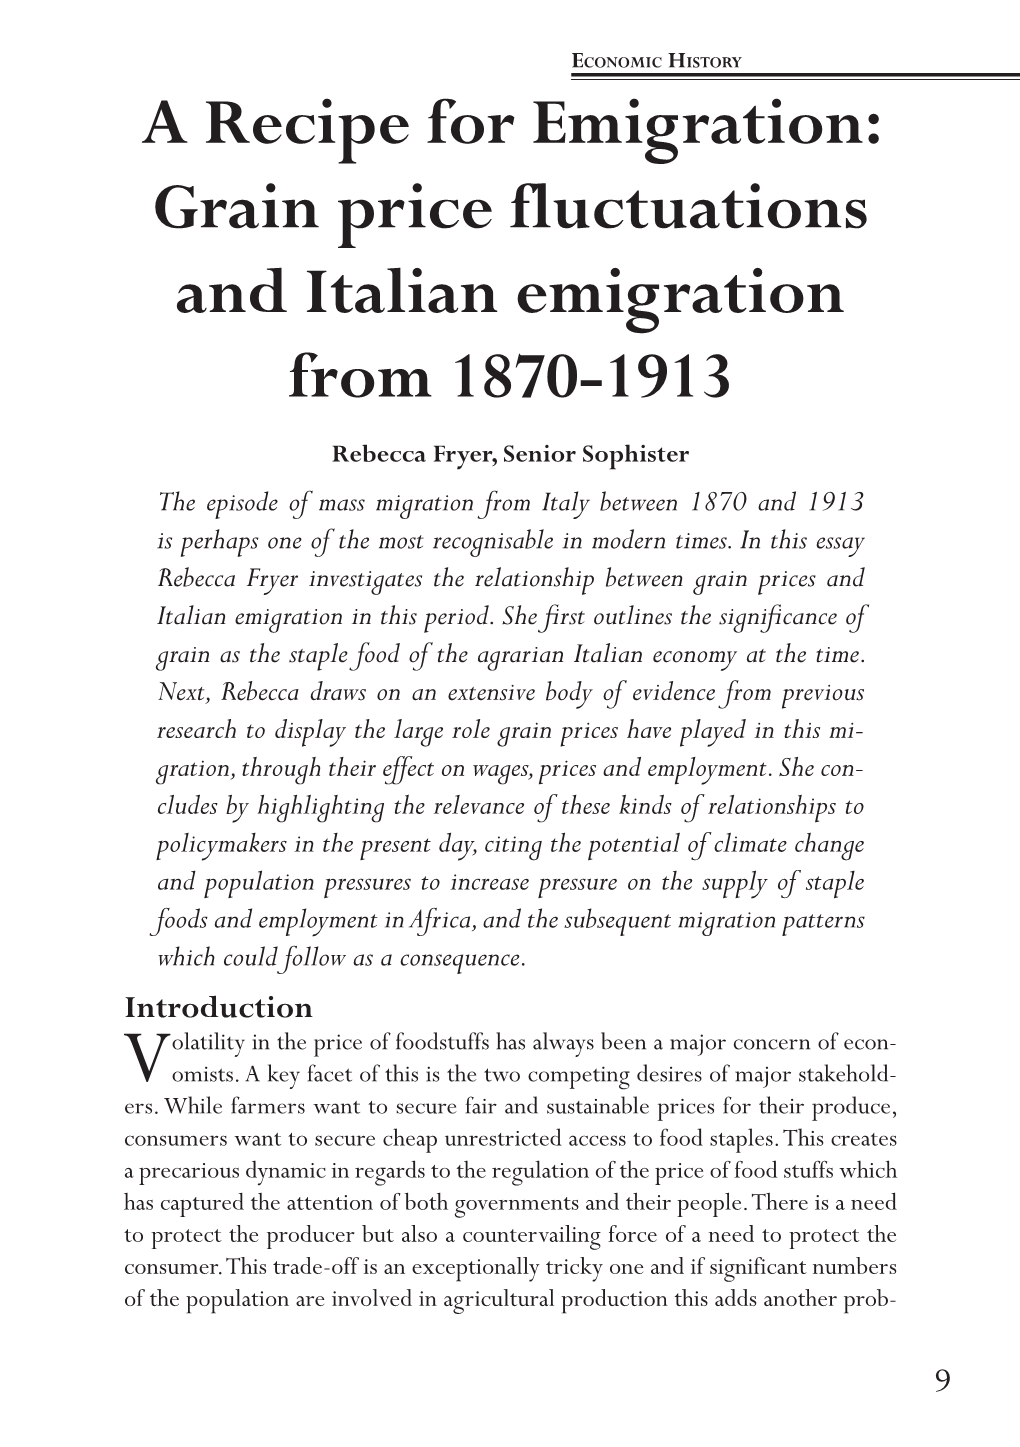 A Recipe for Emigration: Grain Price Fluctuations and Italian Emigration